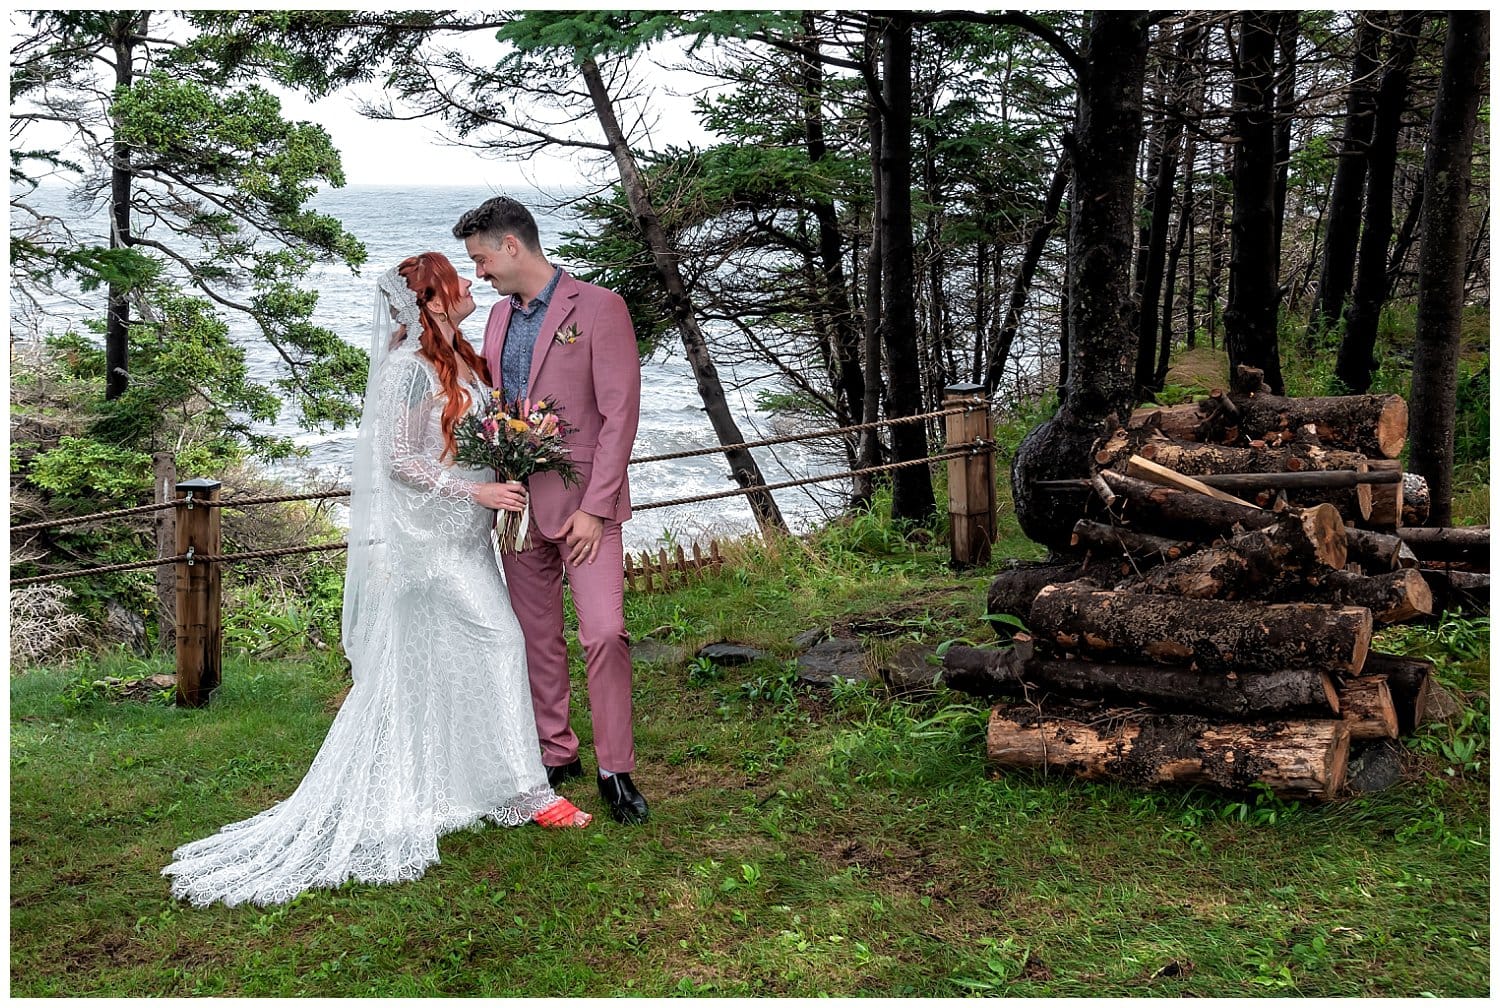 The bride and groom embrace in front of the ocean during their wedding photos at an Airbnb in Bear Cove NS.